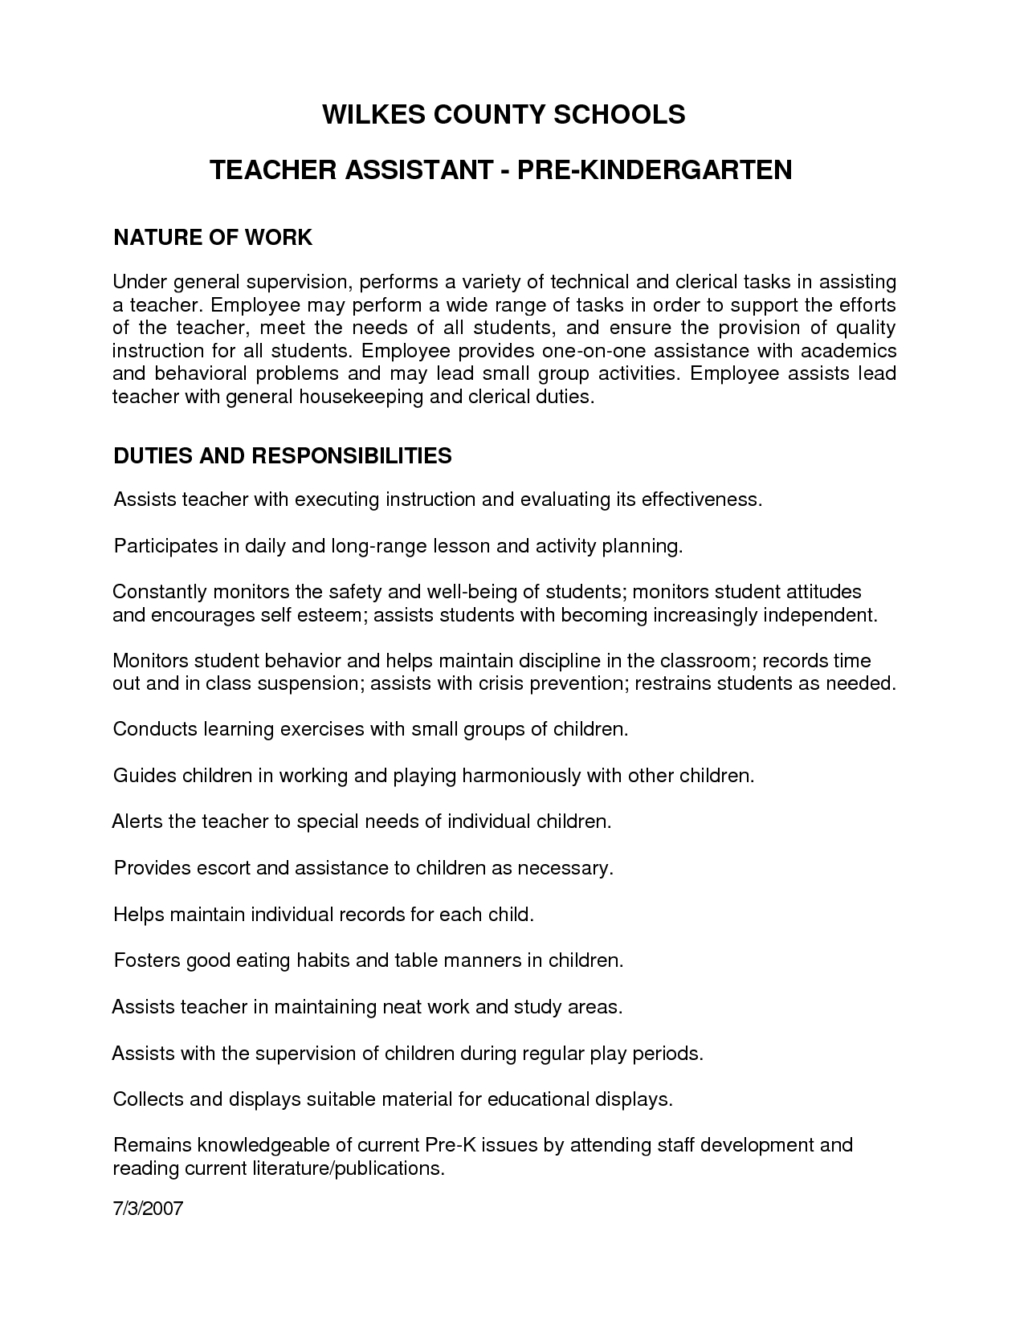 Letter Recommendation For Preschool Teacher Assistant Cover with size 1024 X 1325